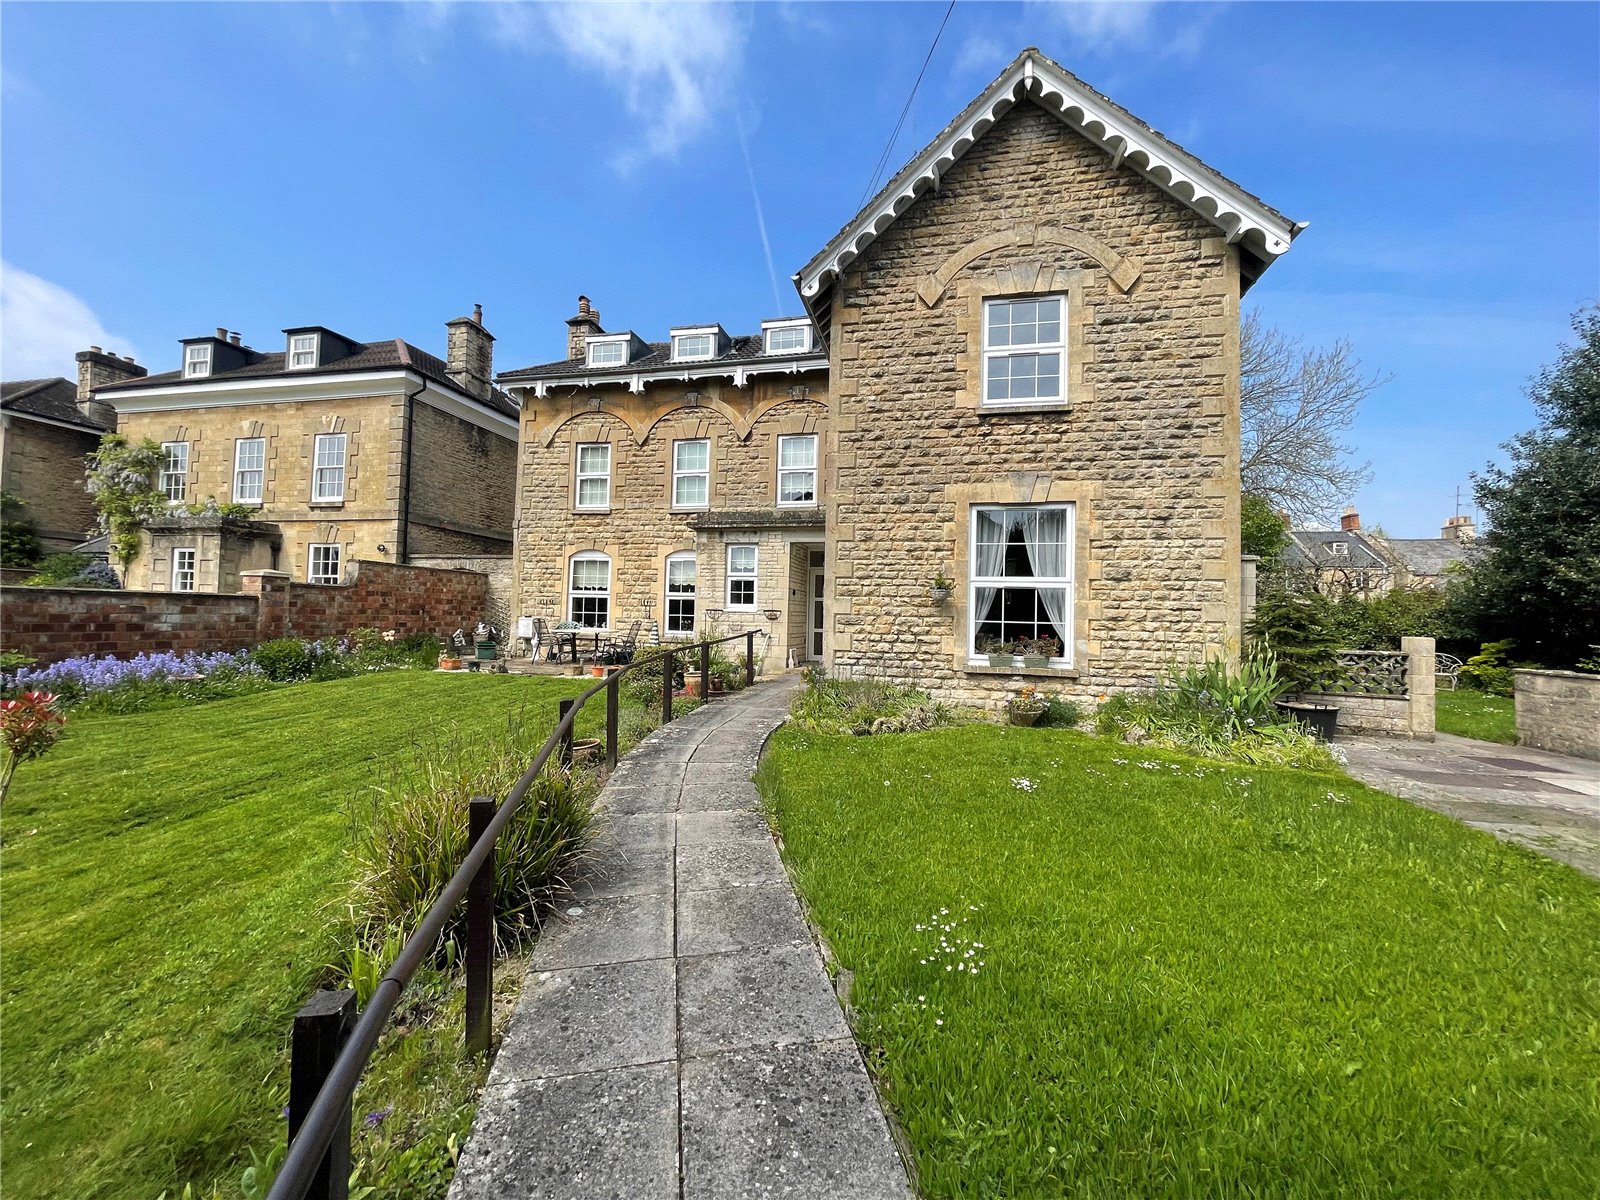 Somerford Road, Cirencester, Gloucestershire, GL7